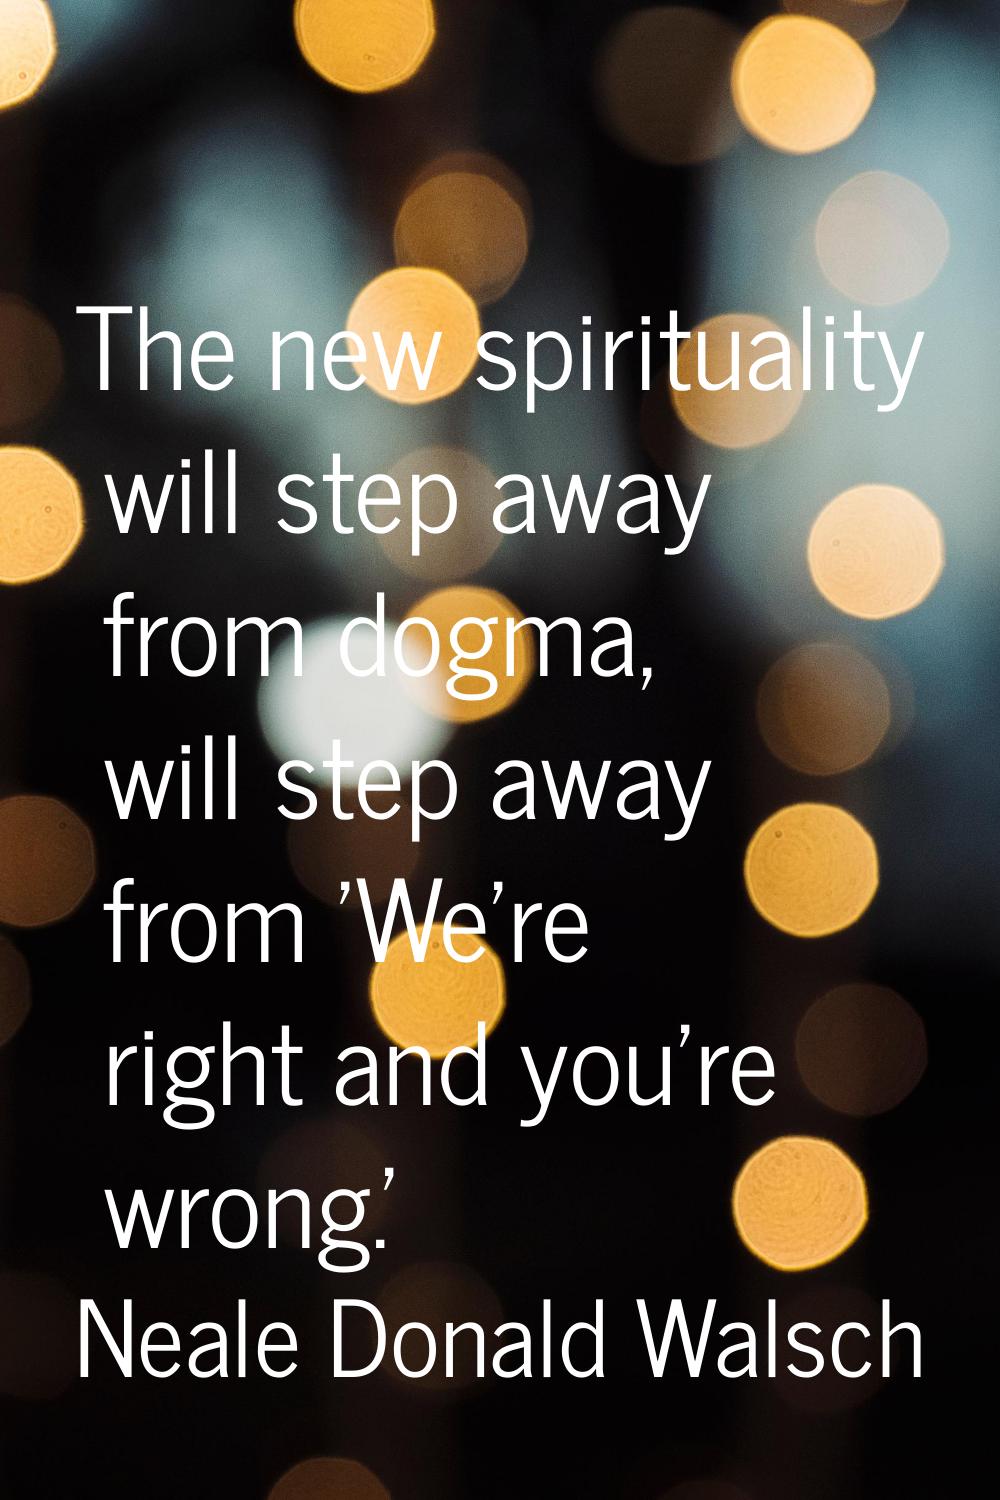 The new spirituality will step away from dogma, will step away from 'We're right and you're wrong.'